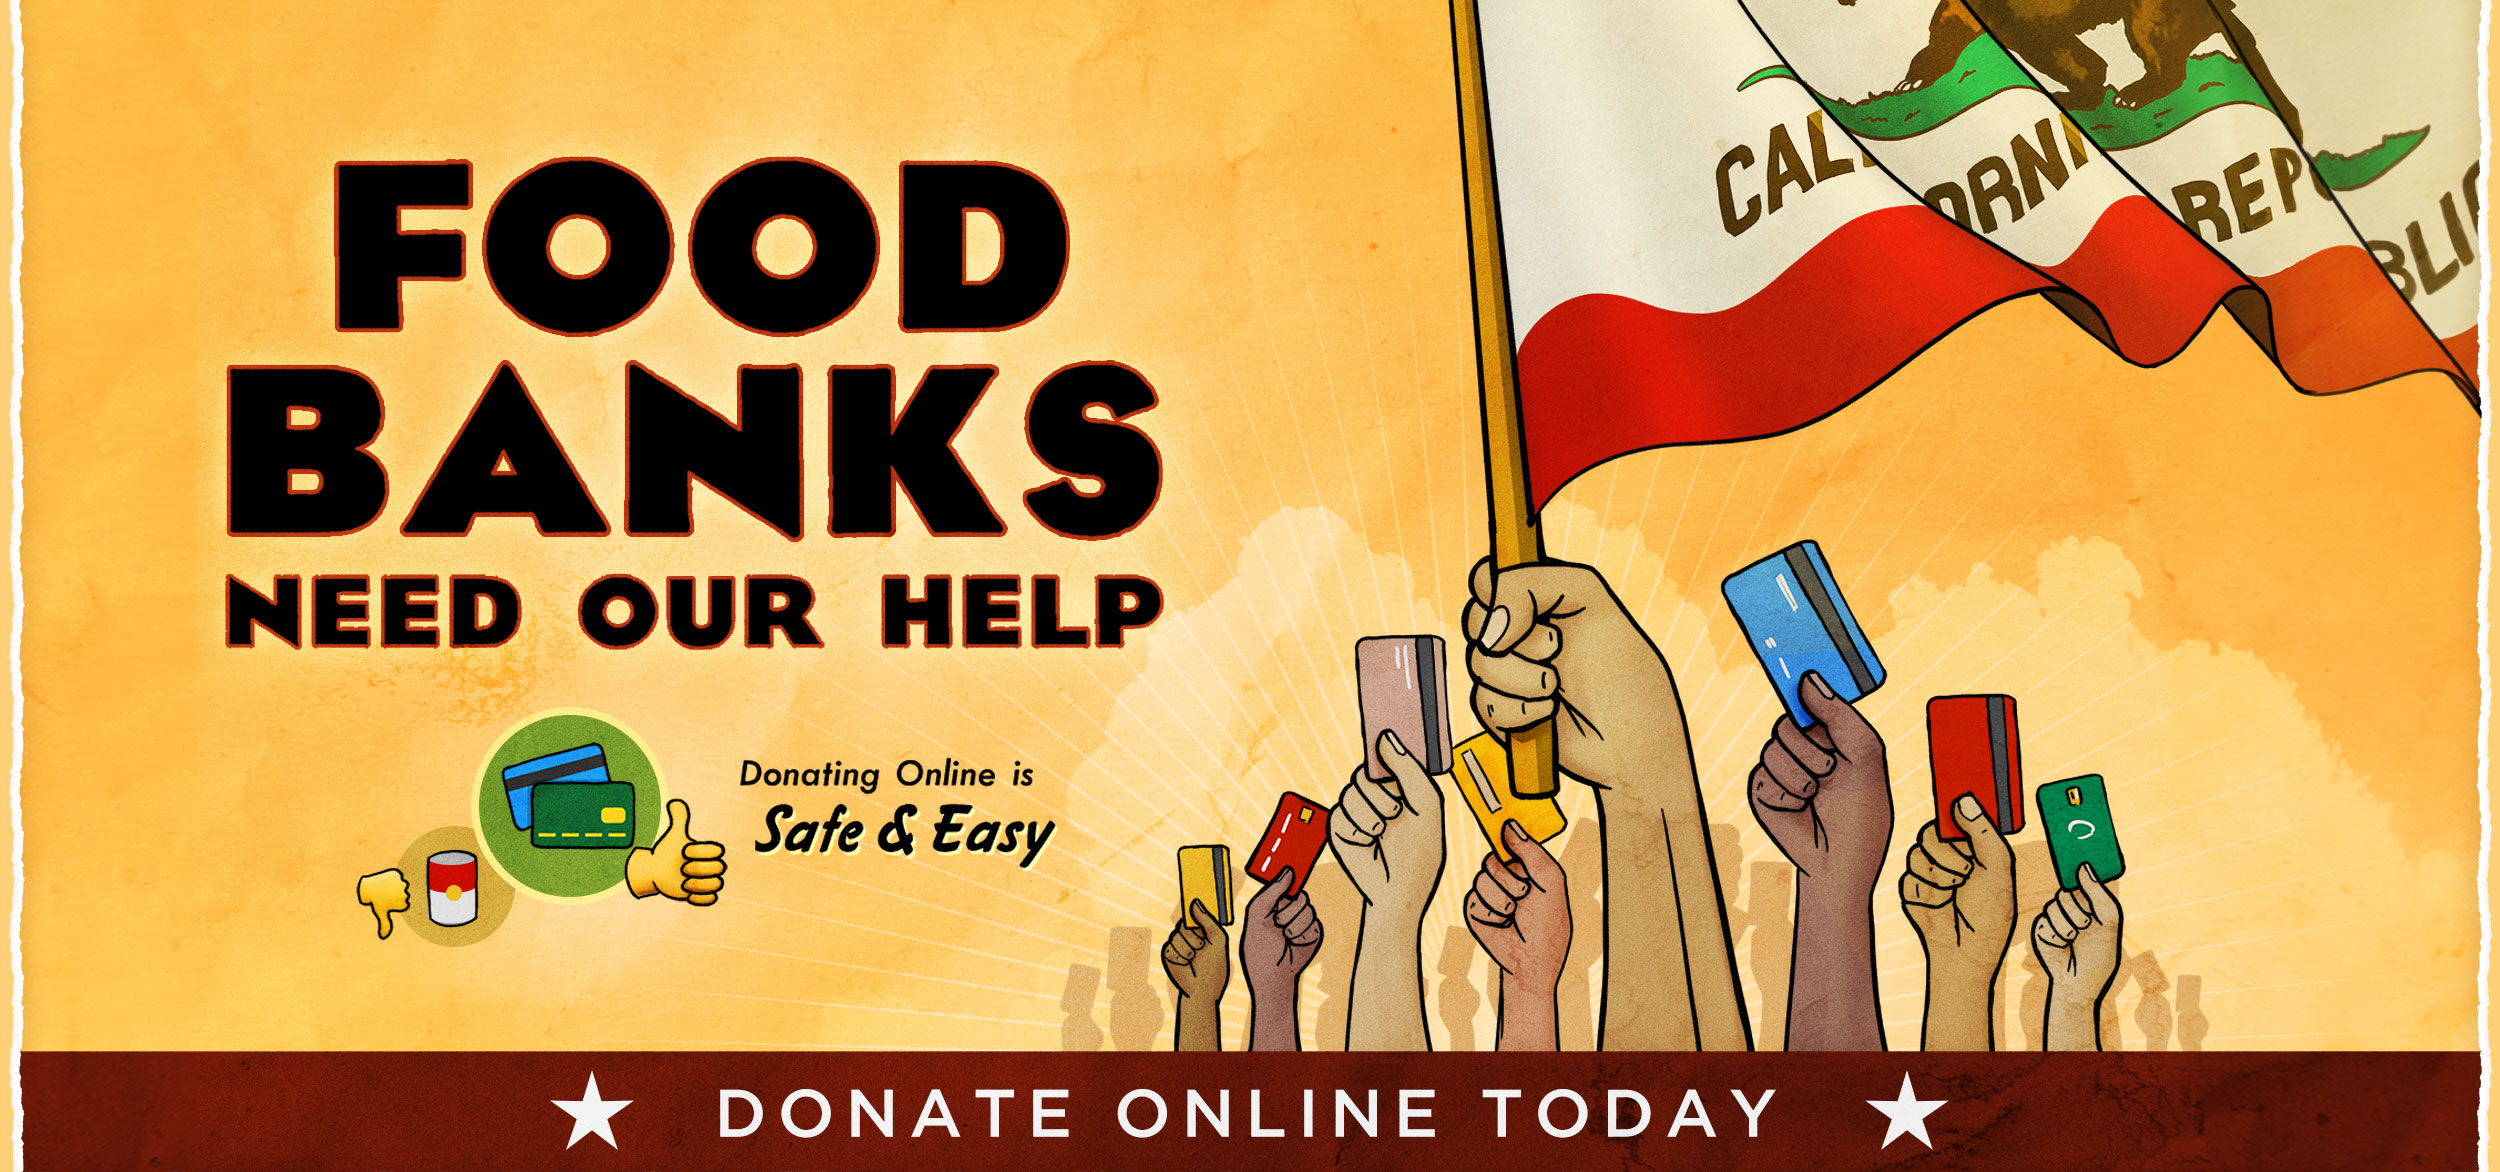 Food Banks Need Our Help - Donate Online Today